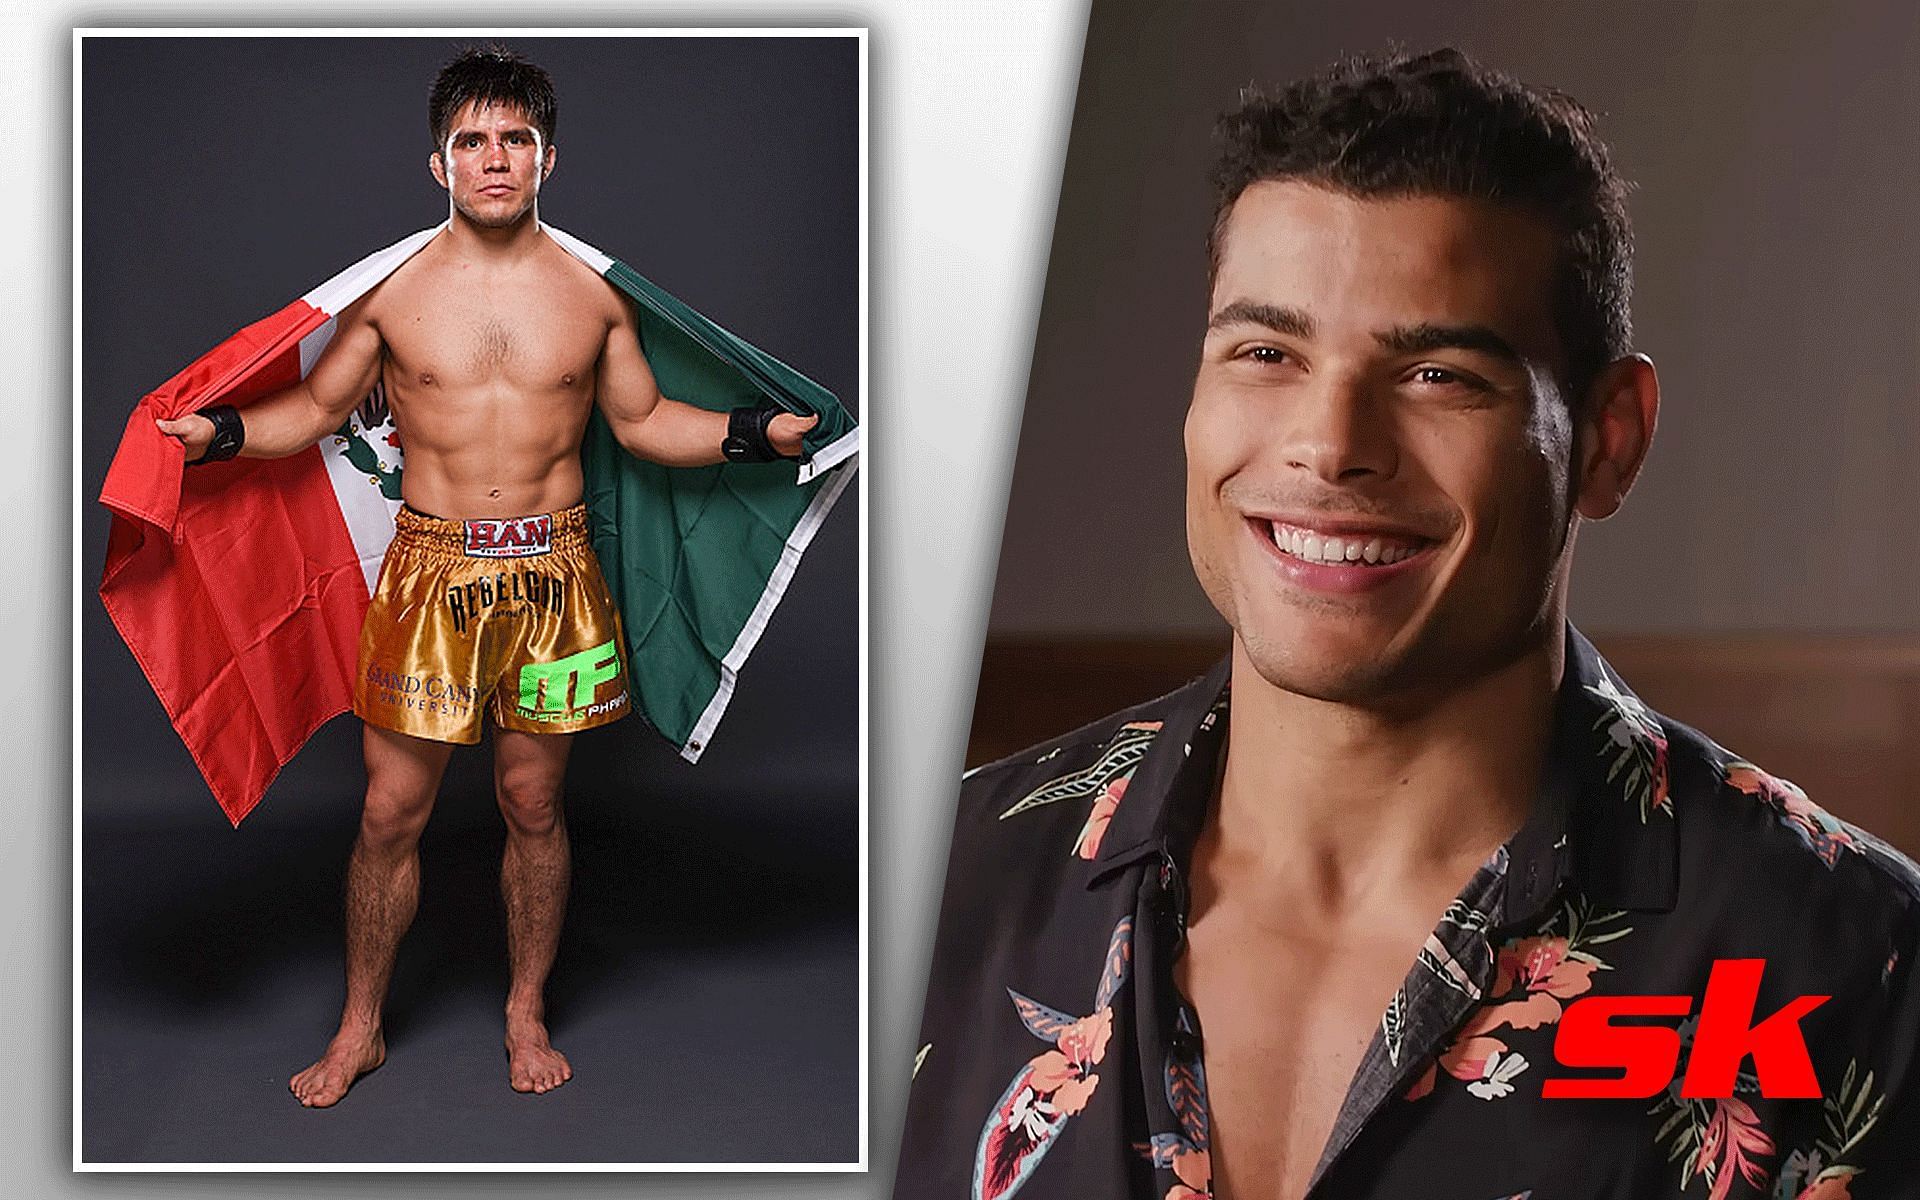 Henry Cejudo (Left) and Paulo Costa (Right) [Images via: Costa from BT Sport |YouTube | Cejudo from ufc.com]